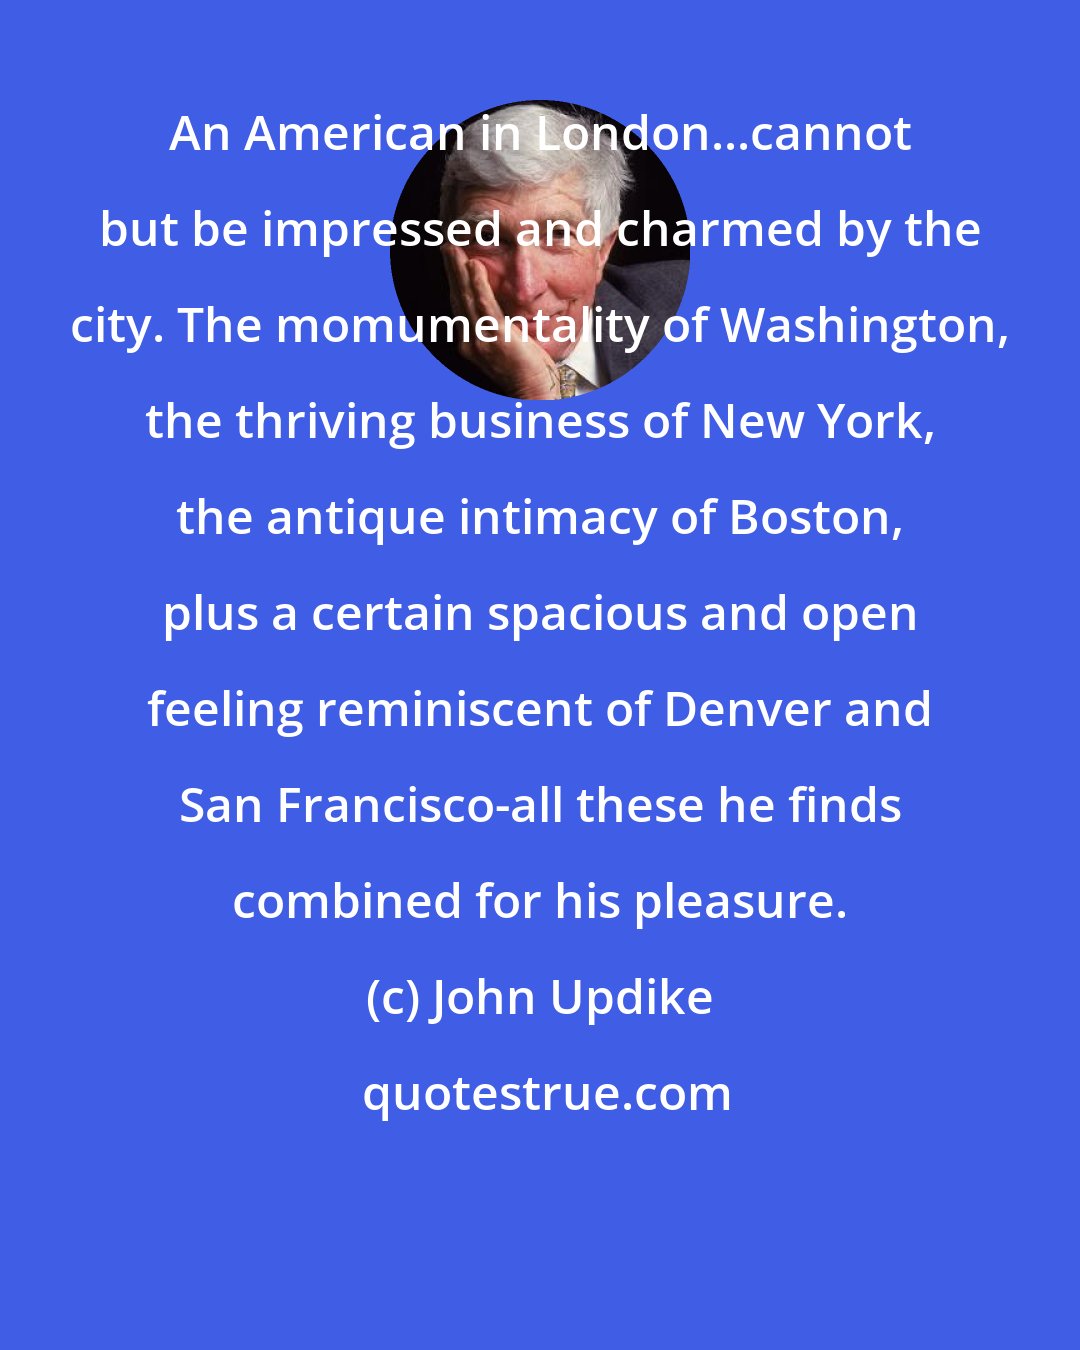 John Updike: An American in London...cannot but be impressed and charmed by the city. The momumentality of Washington, the thriving business of New York, the antique intimacy of Boston, plus a certain spacious and open feeling reminiscent of Denver and San Francisco-all these he finds combined for his pleasure.